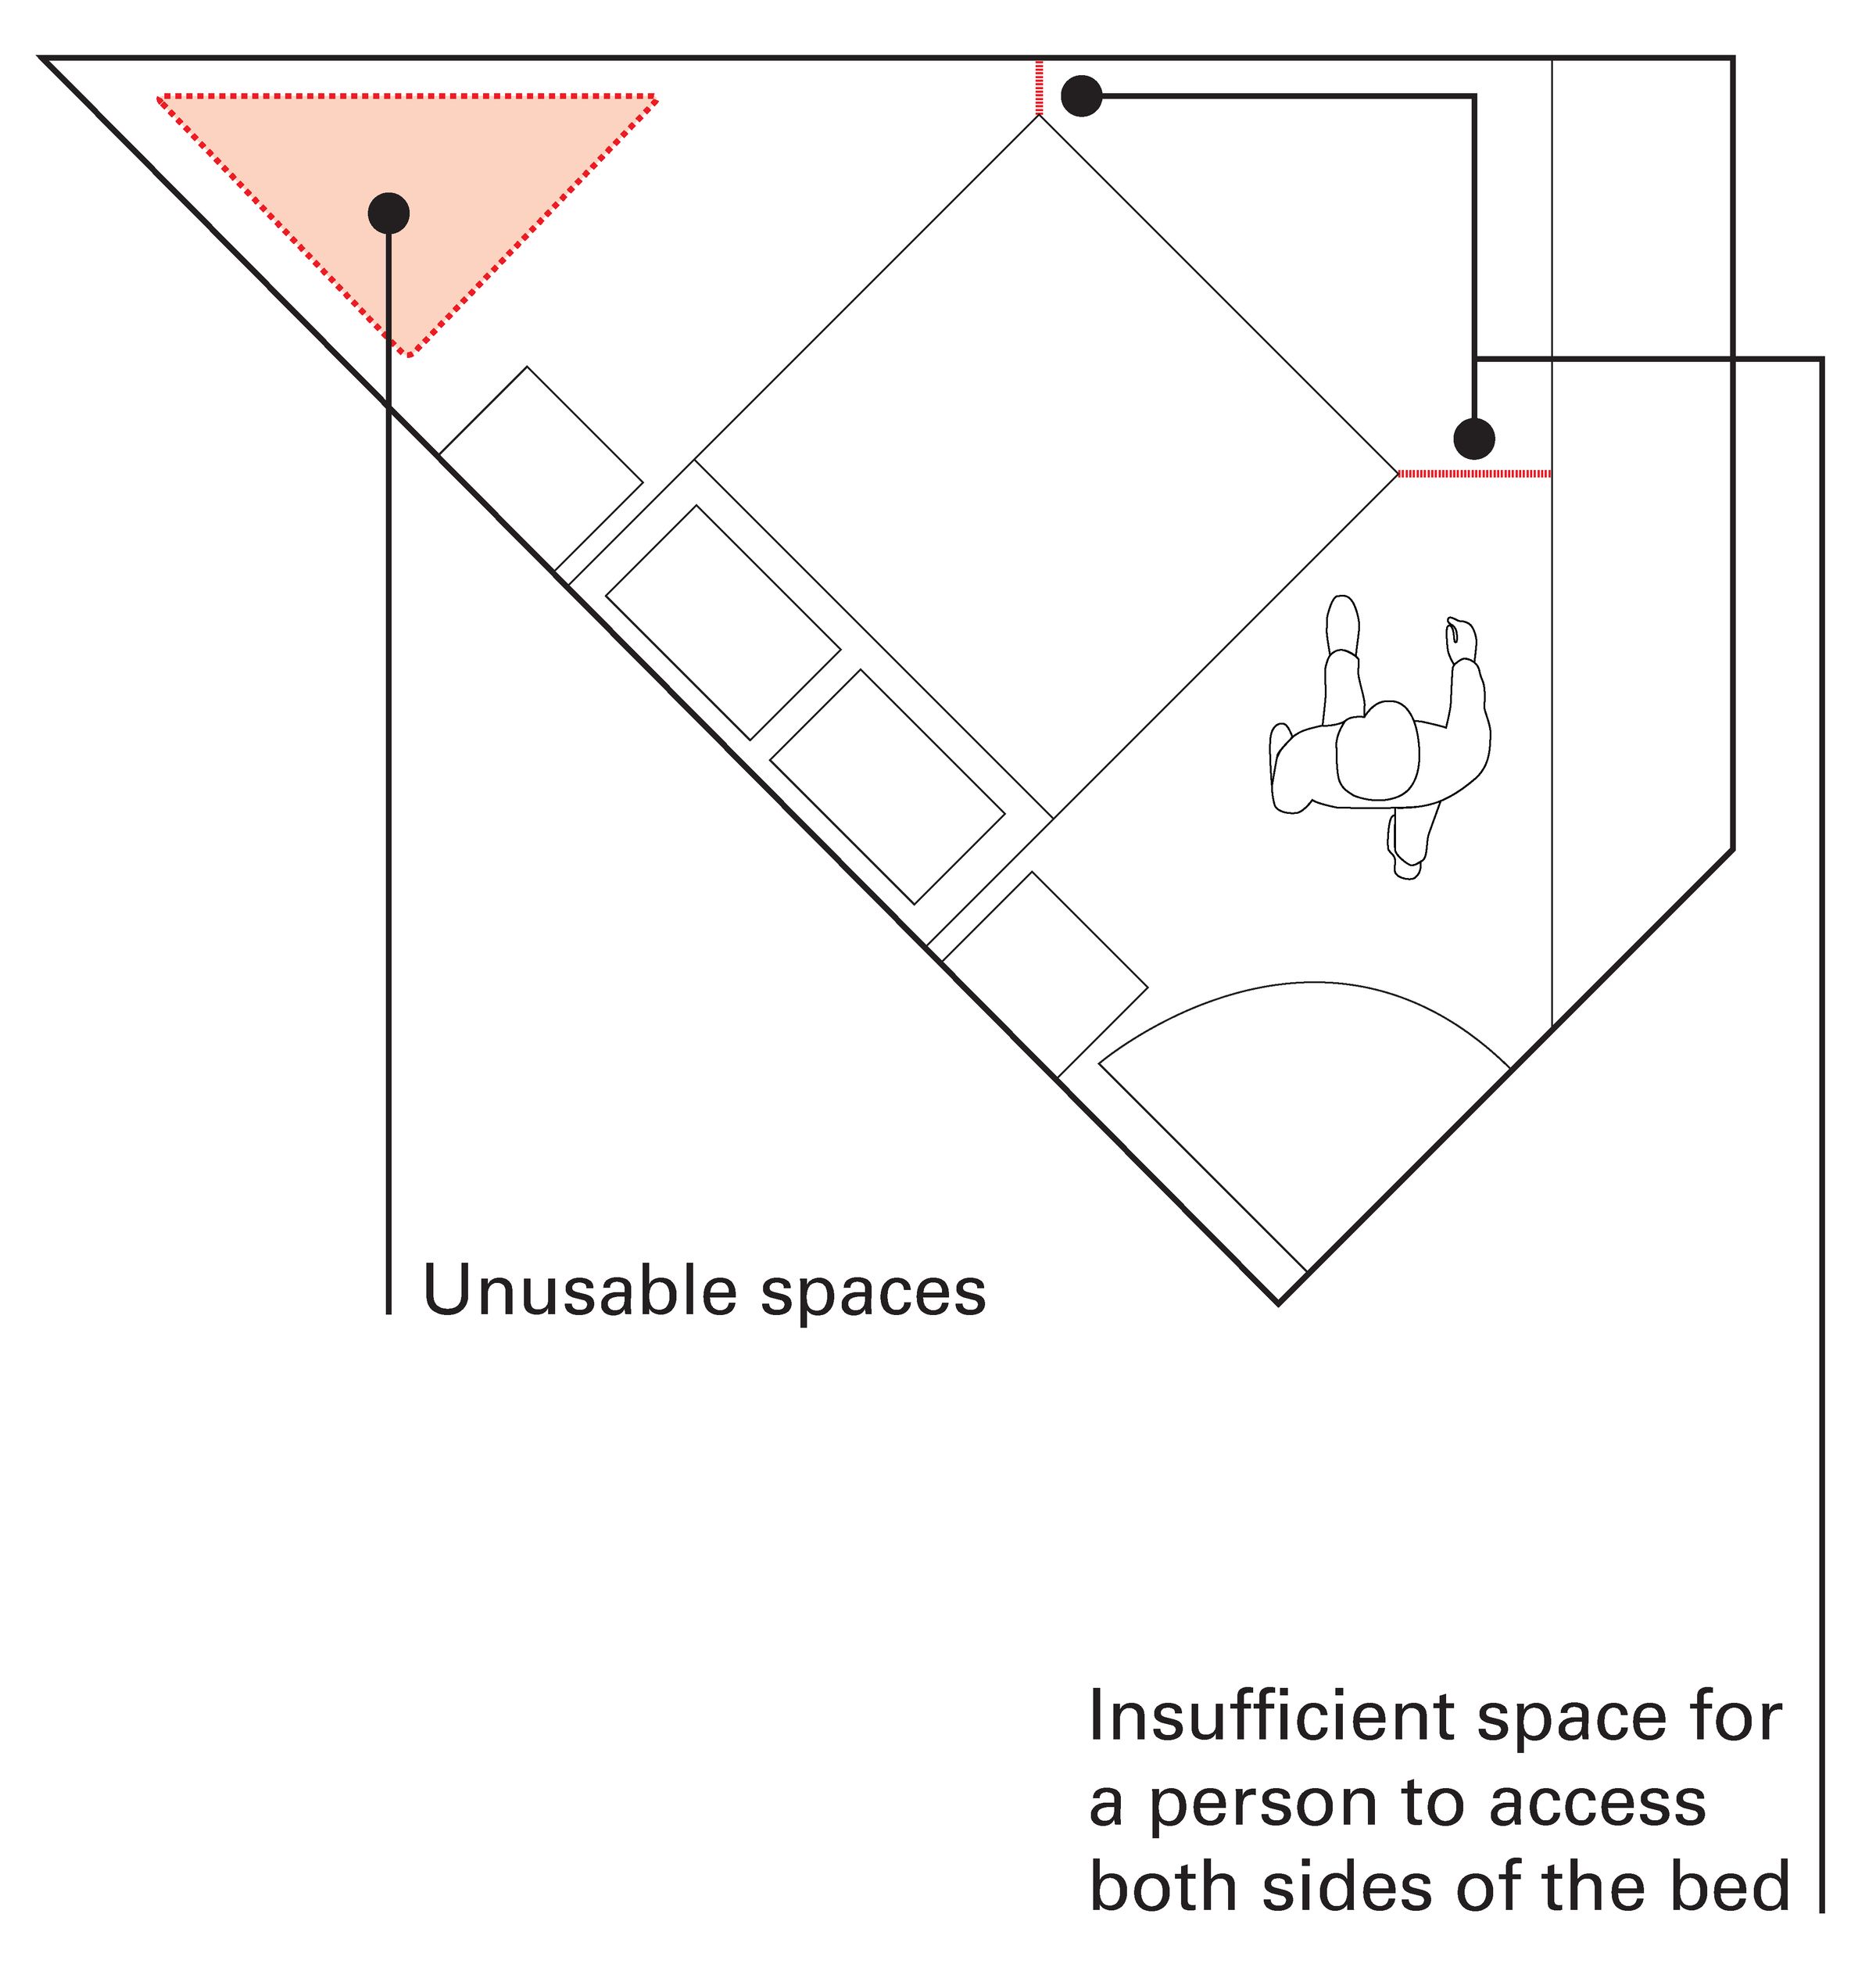 Diagram of an irregular floor plan for a bedroom. The bedroom is an irregular triangular shape. The shape causes little room for circulation around the bed and unusable spaces in the corner next to the bed.